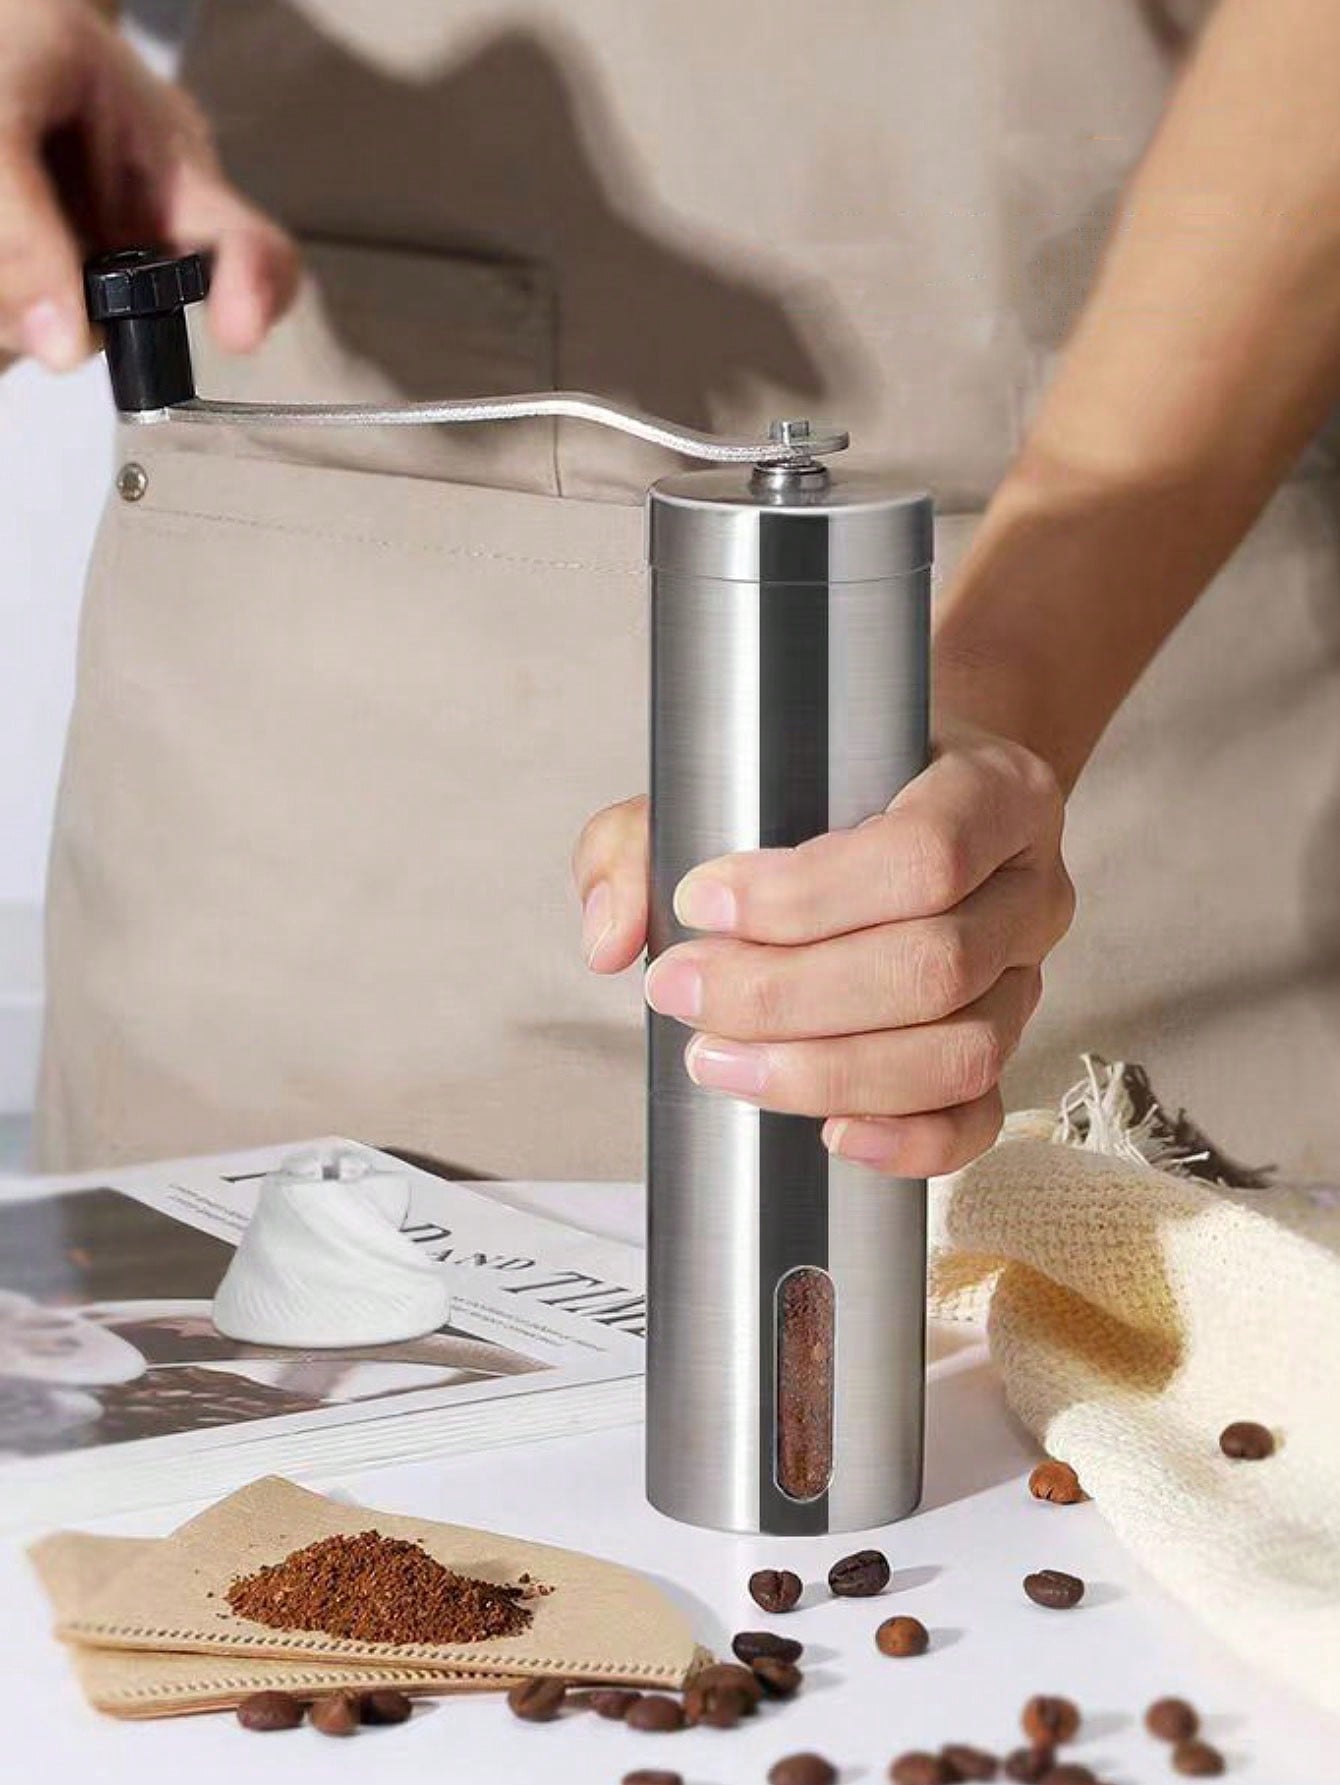 1pc Portable Electric Coffee Grinder, Cylinder Shape